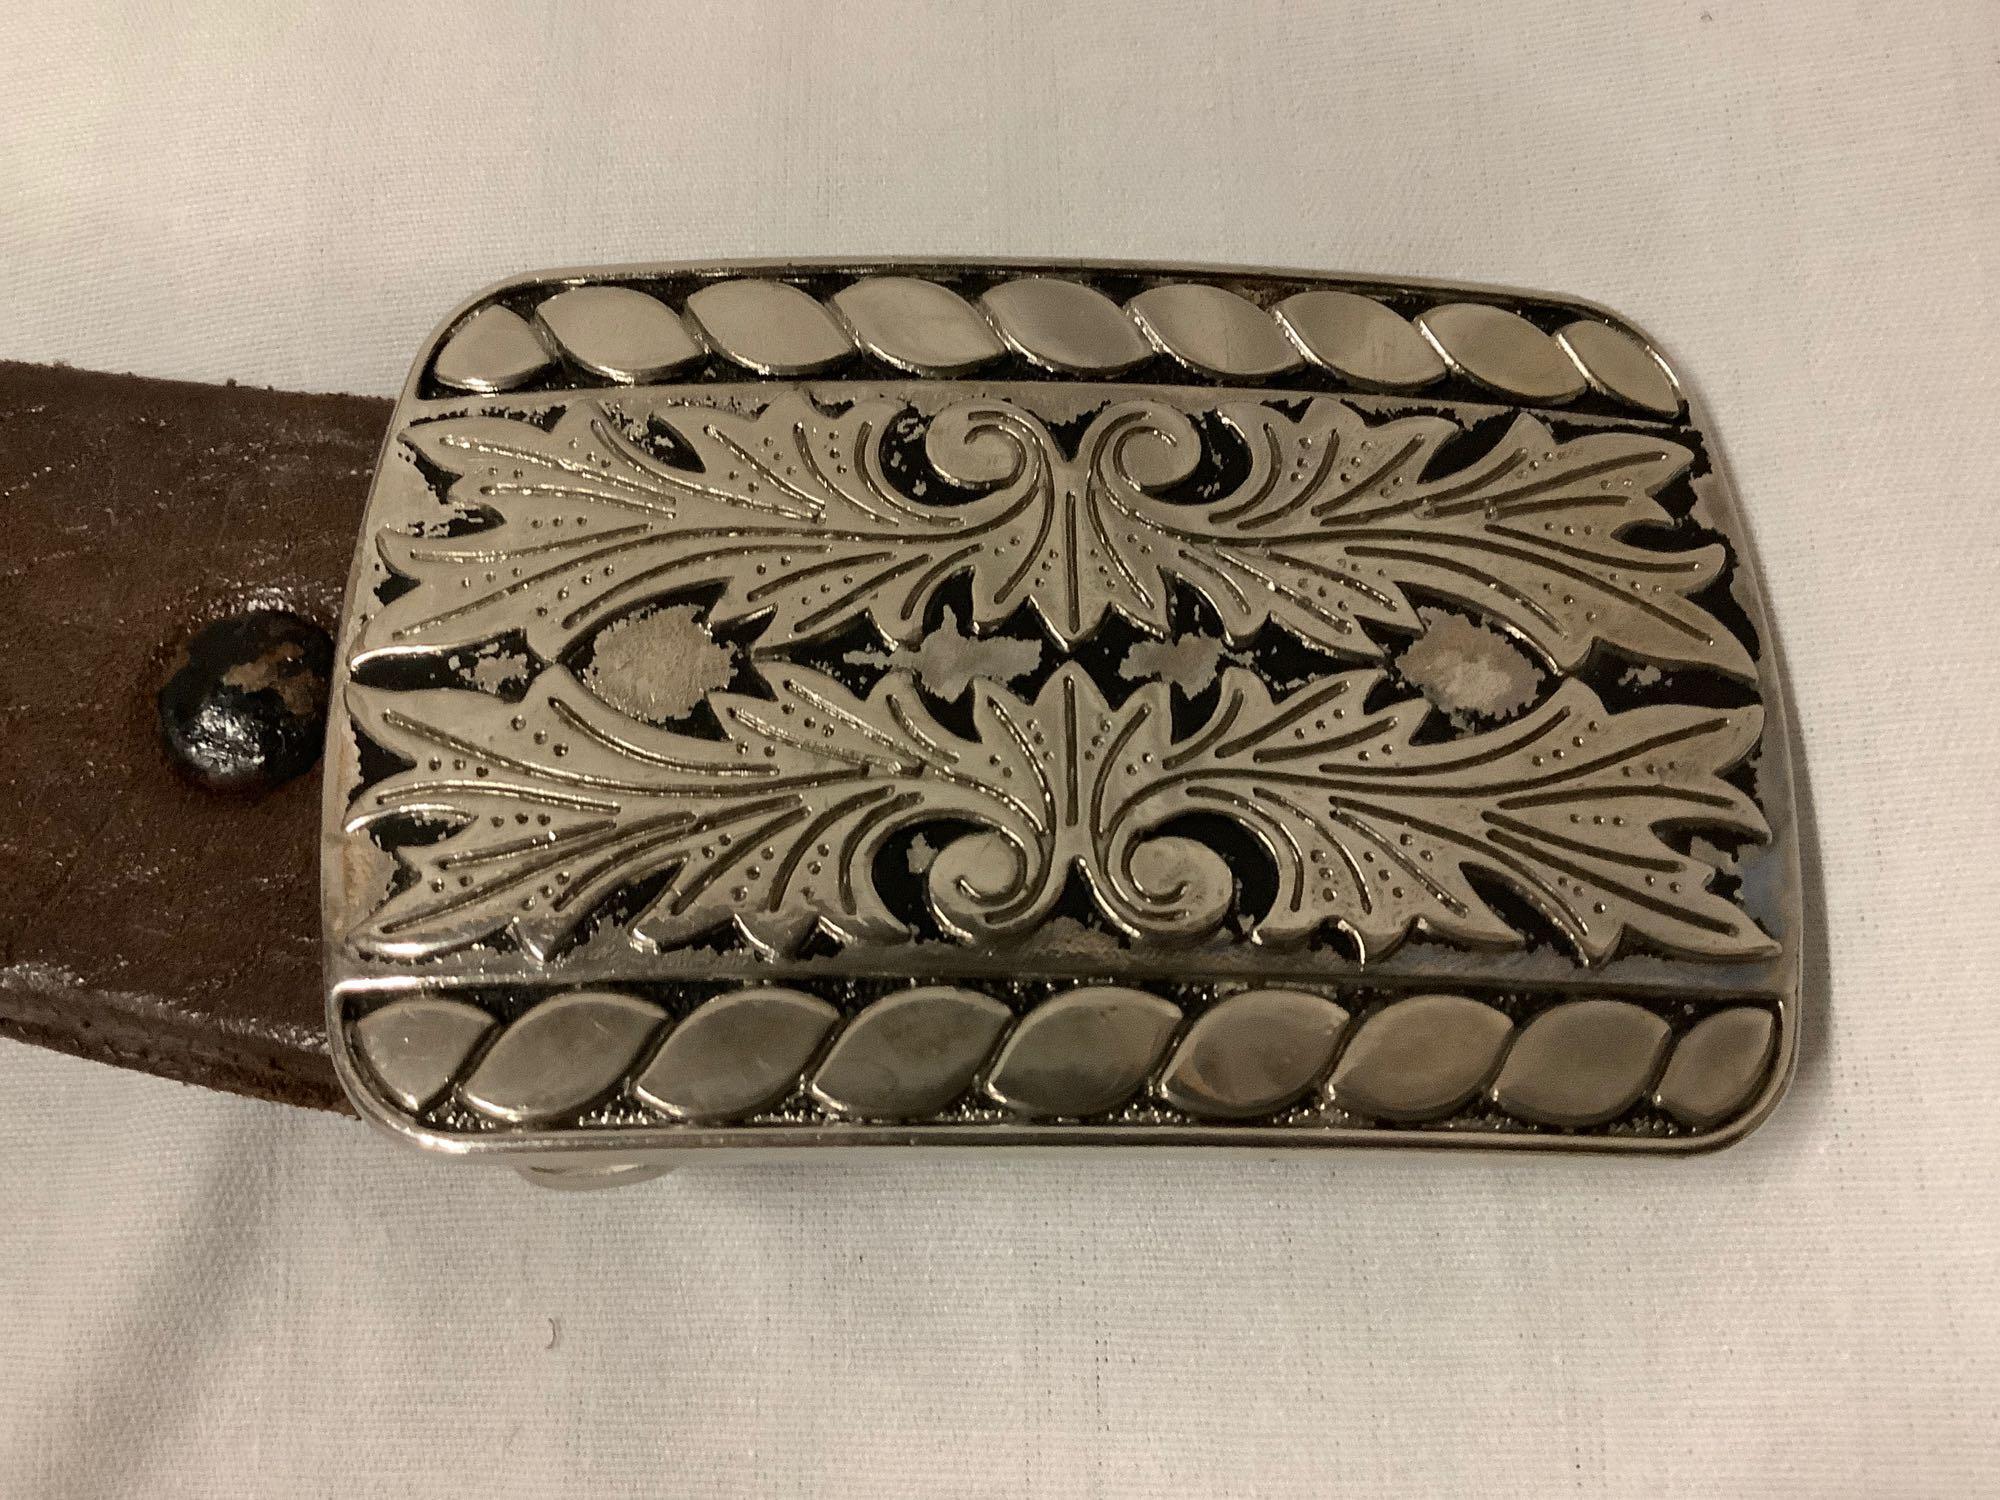 Vintage men?s leather braided belt with etched metal buckle, approx 40 inches total length